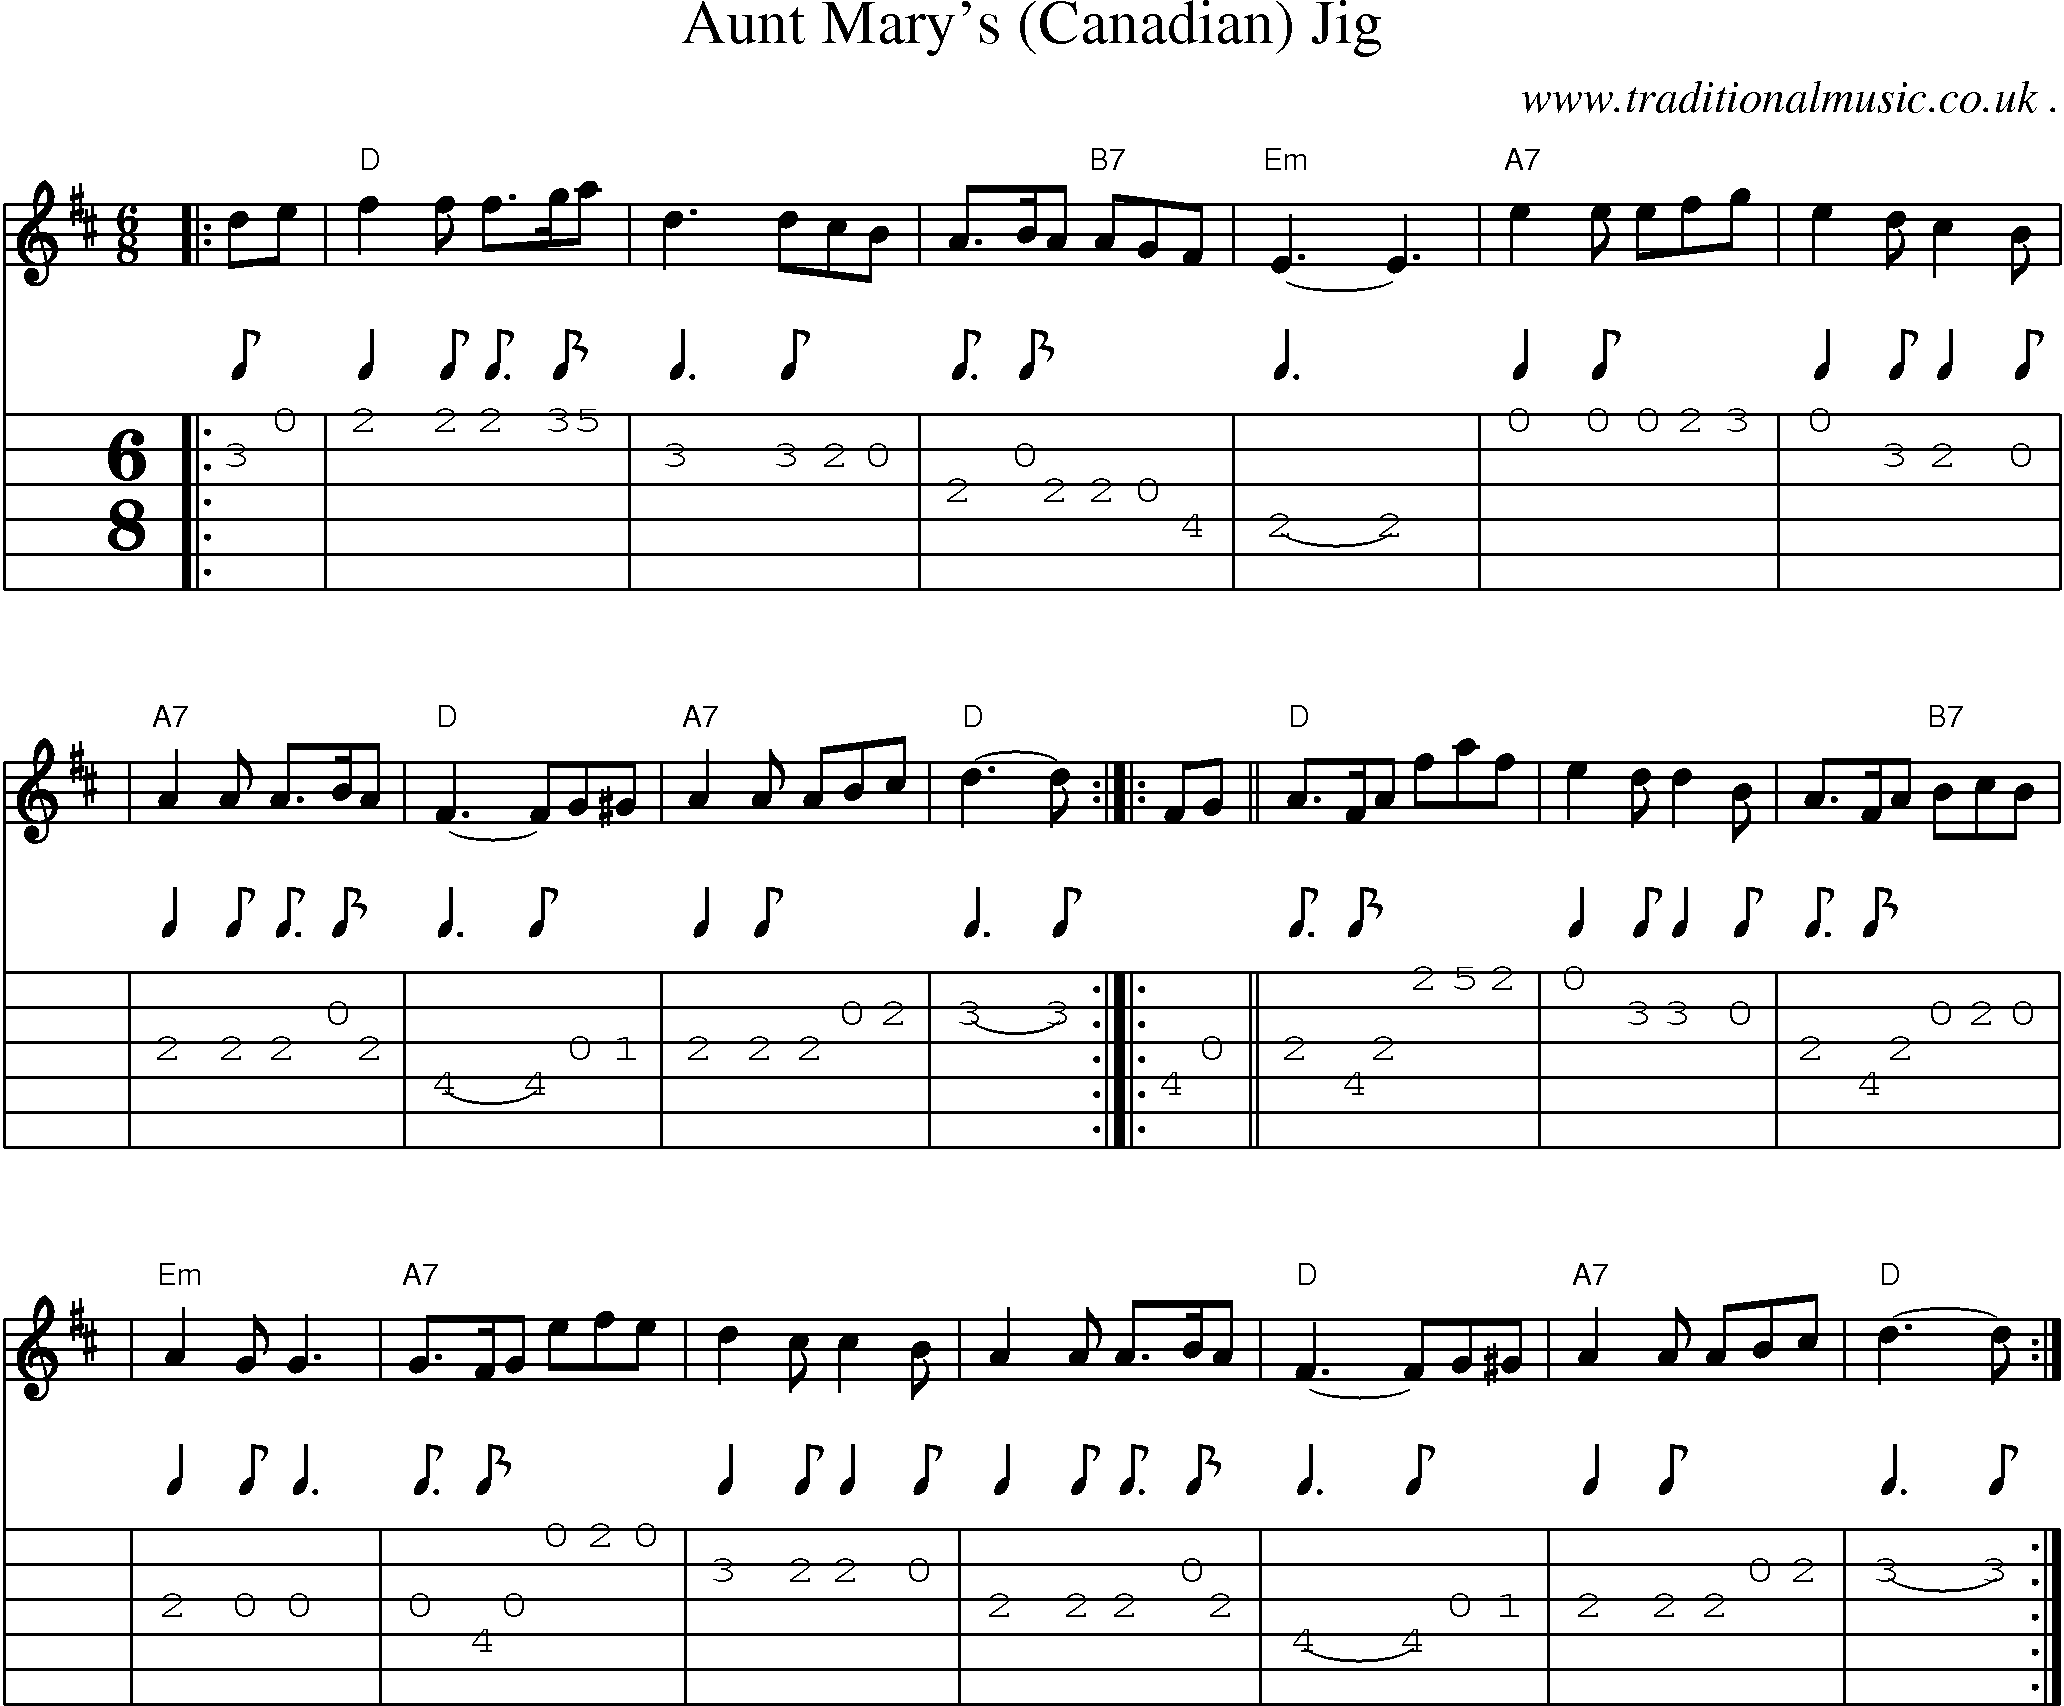 Sheet-music  score, Chords and Guitar Tabs for Aunt Marys Canadian Jig